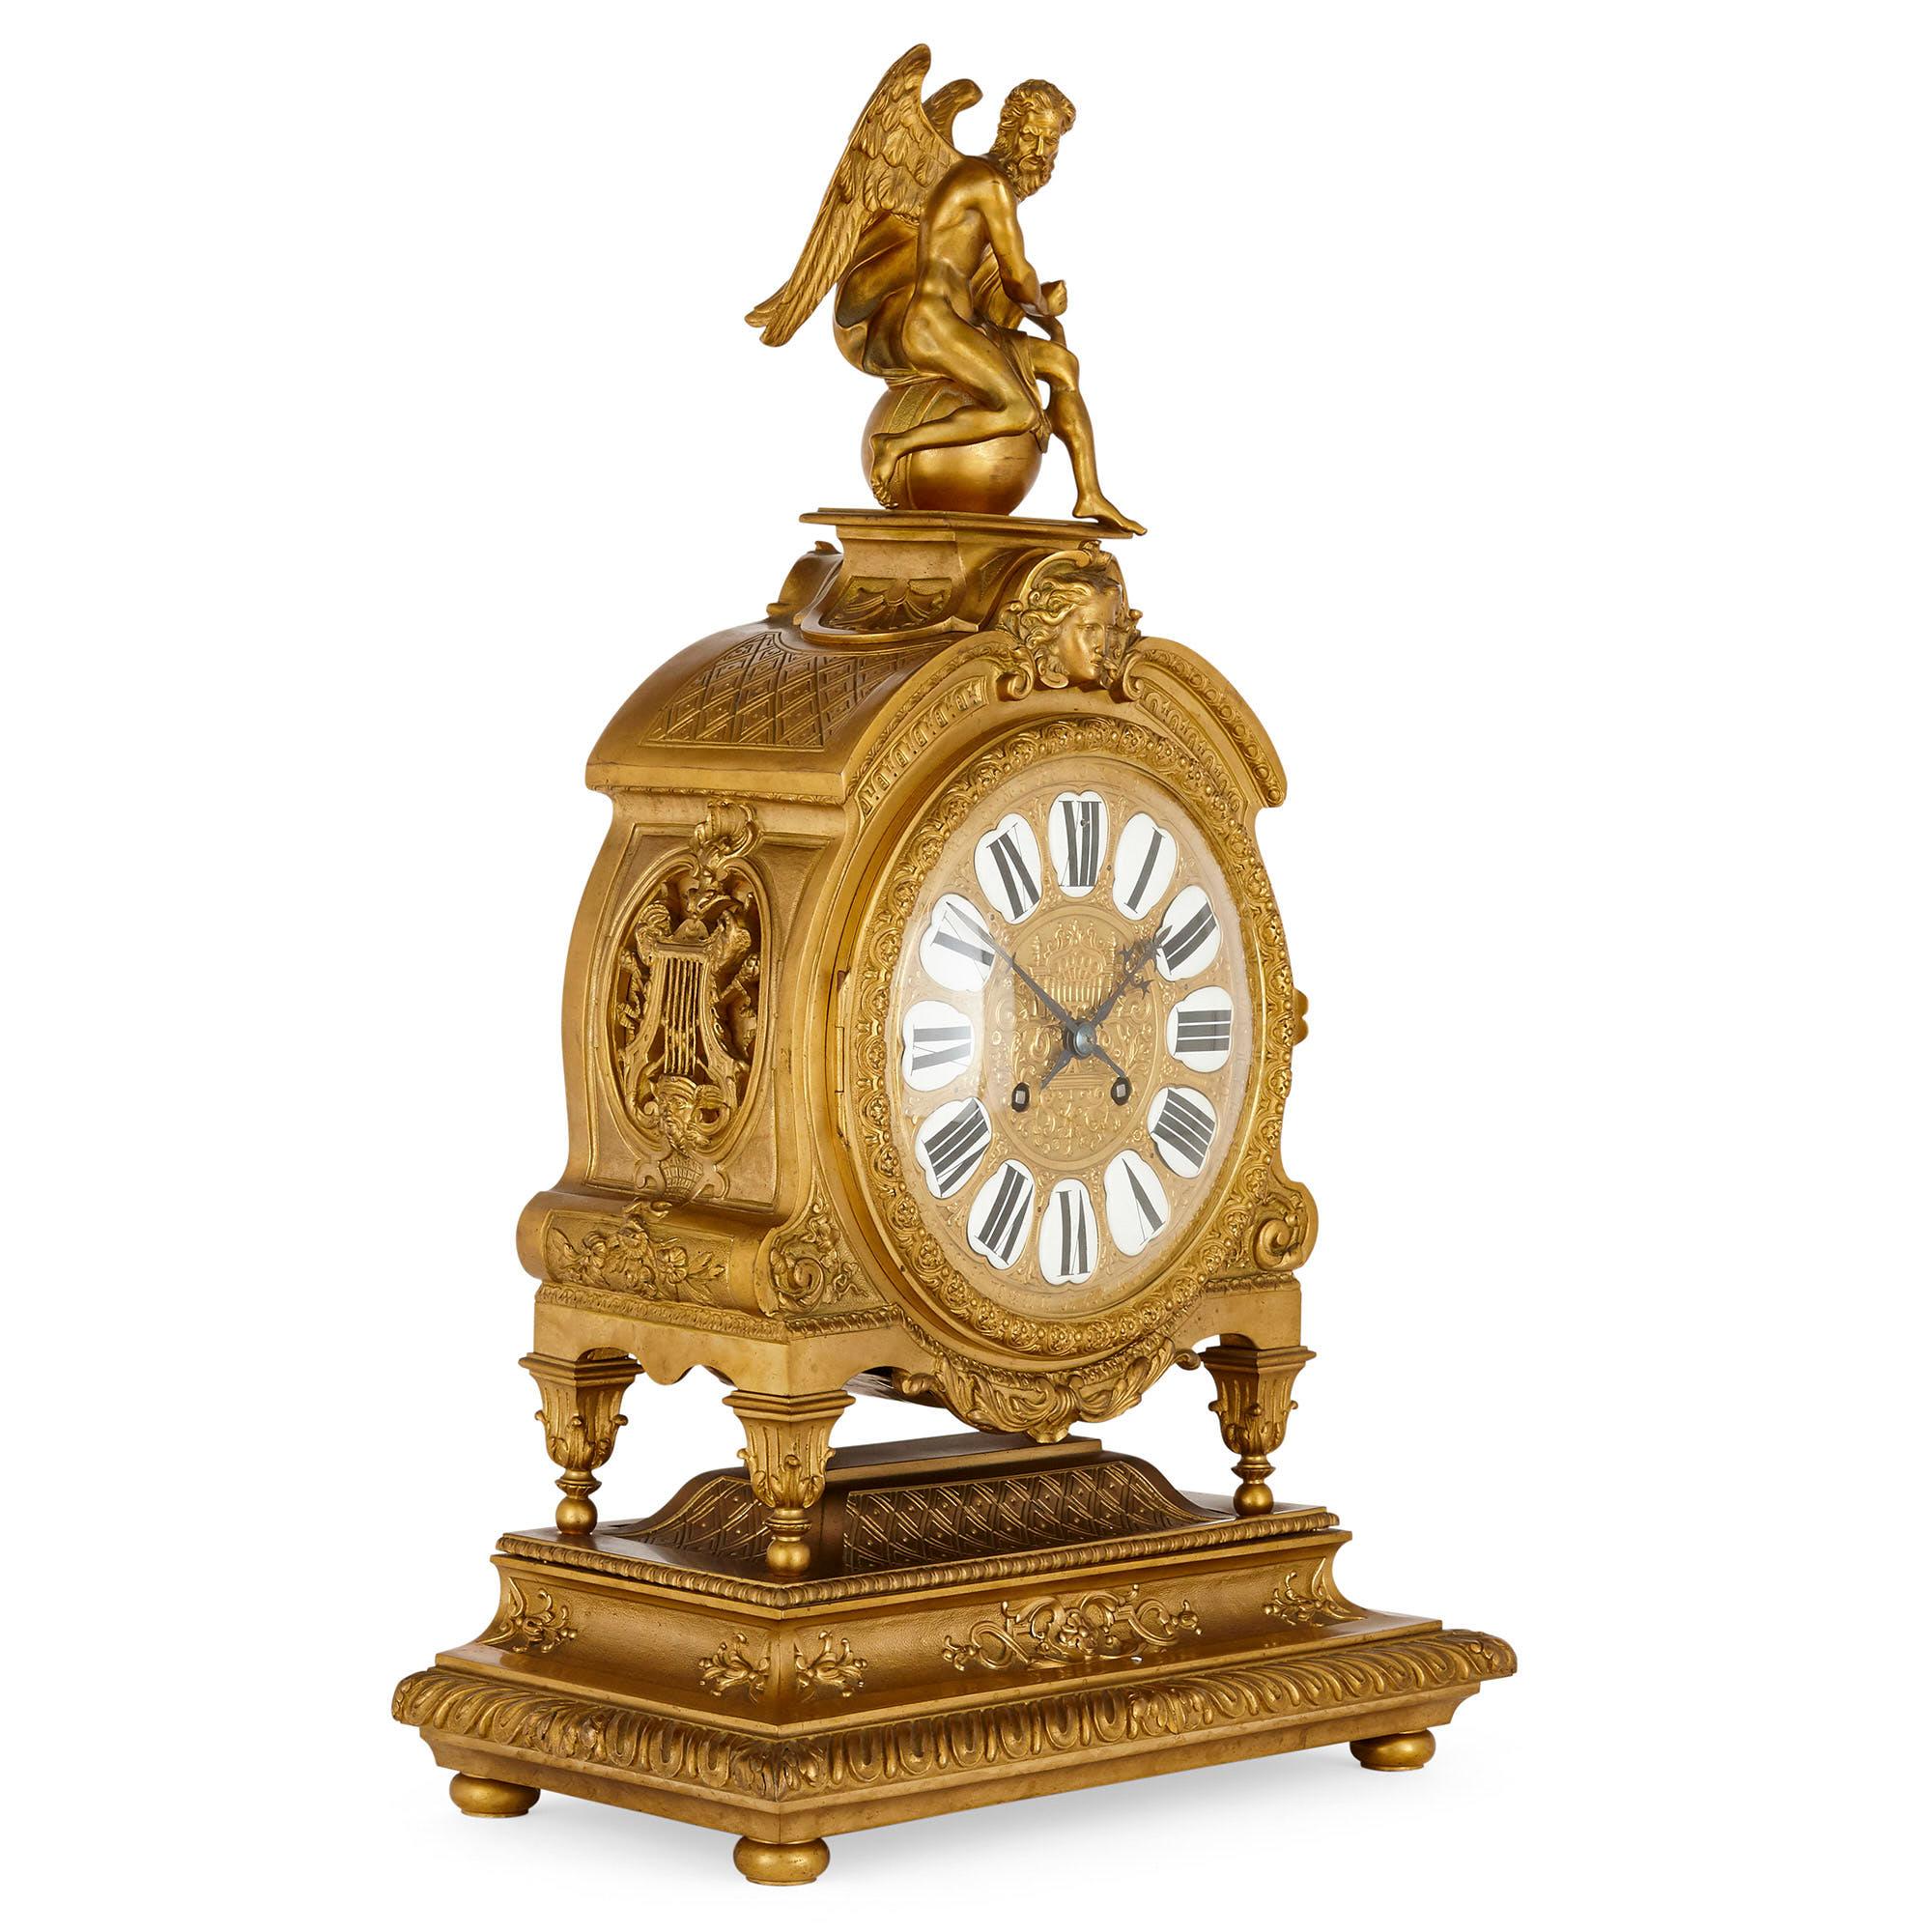 Gilt-bronze clock with enamel numerals attributed to Henri Picard
French, circa 1860
Measures: Height 73cm, width 45cm, depth 23cm

The elaborate case of this beautiful mantel clock has a large central circular dial with enamel Roman numerals